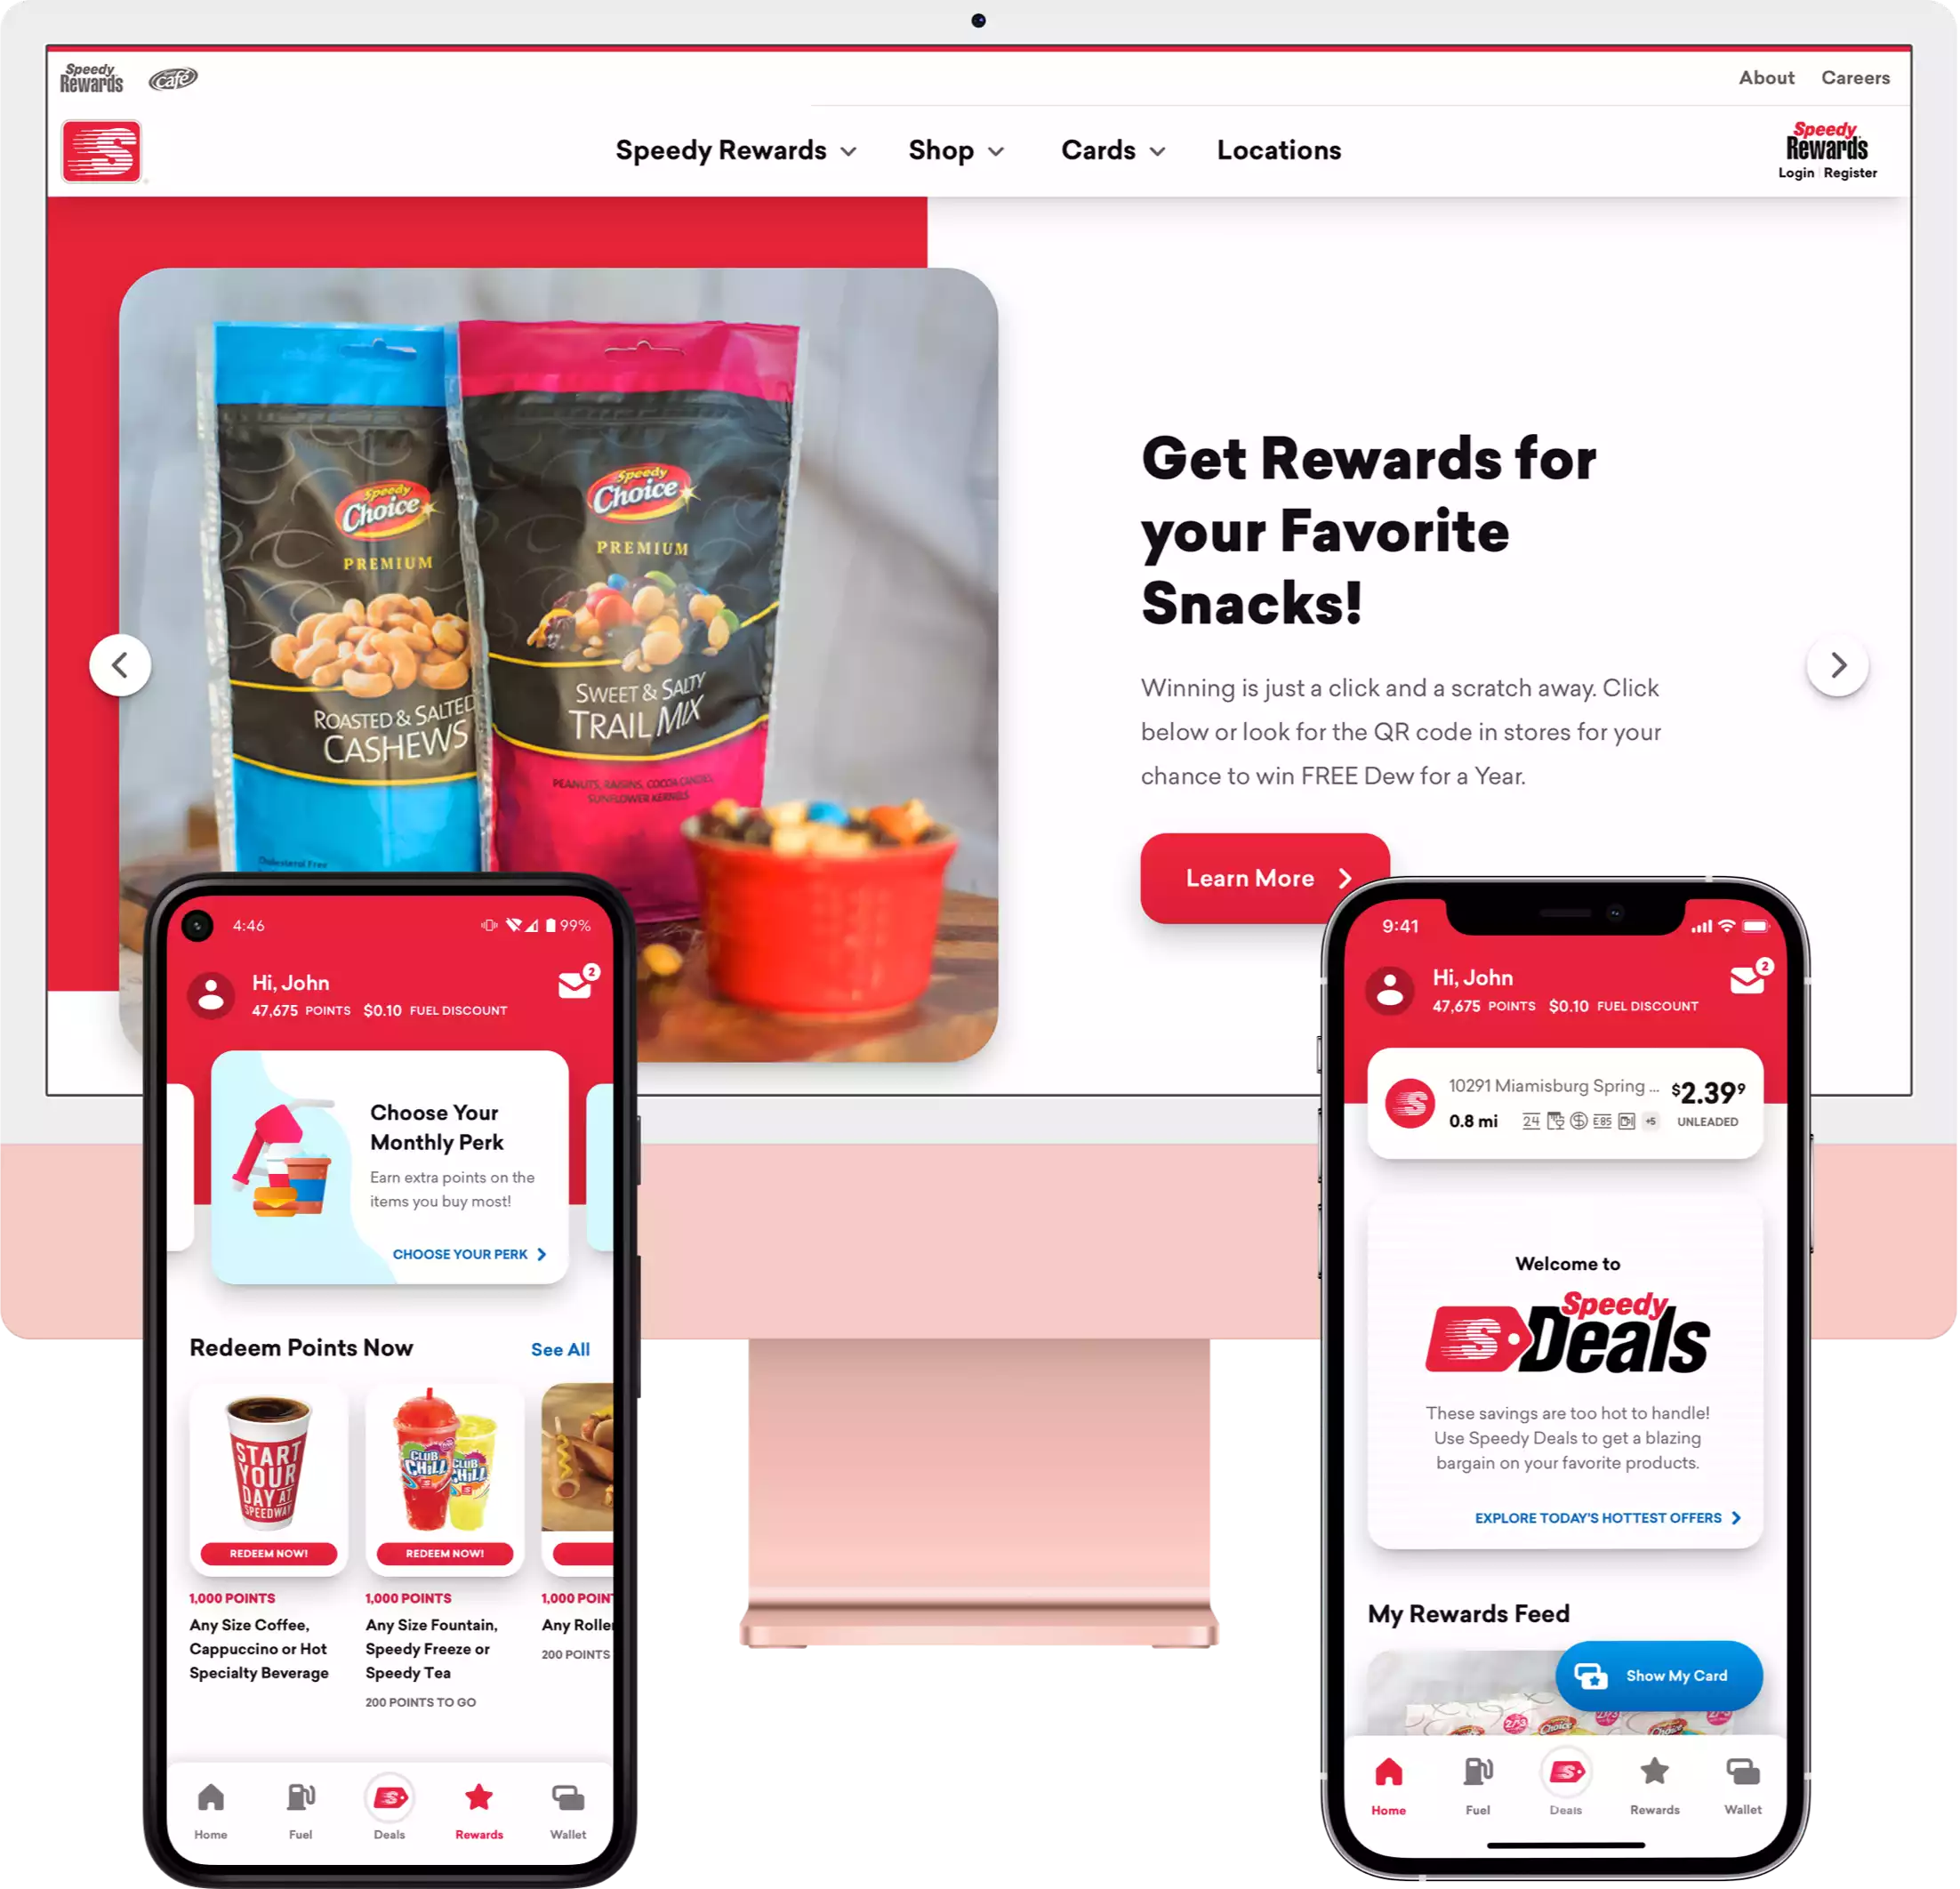 Speedway mobile app and website